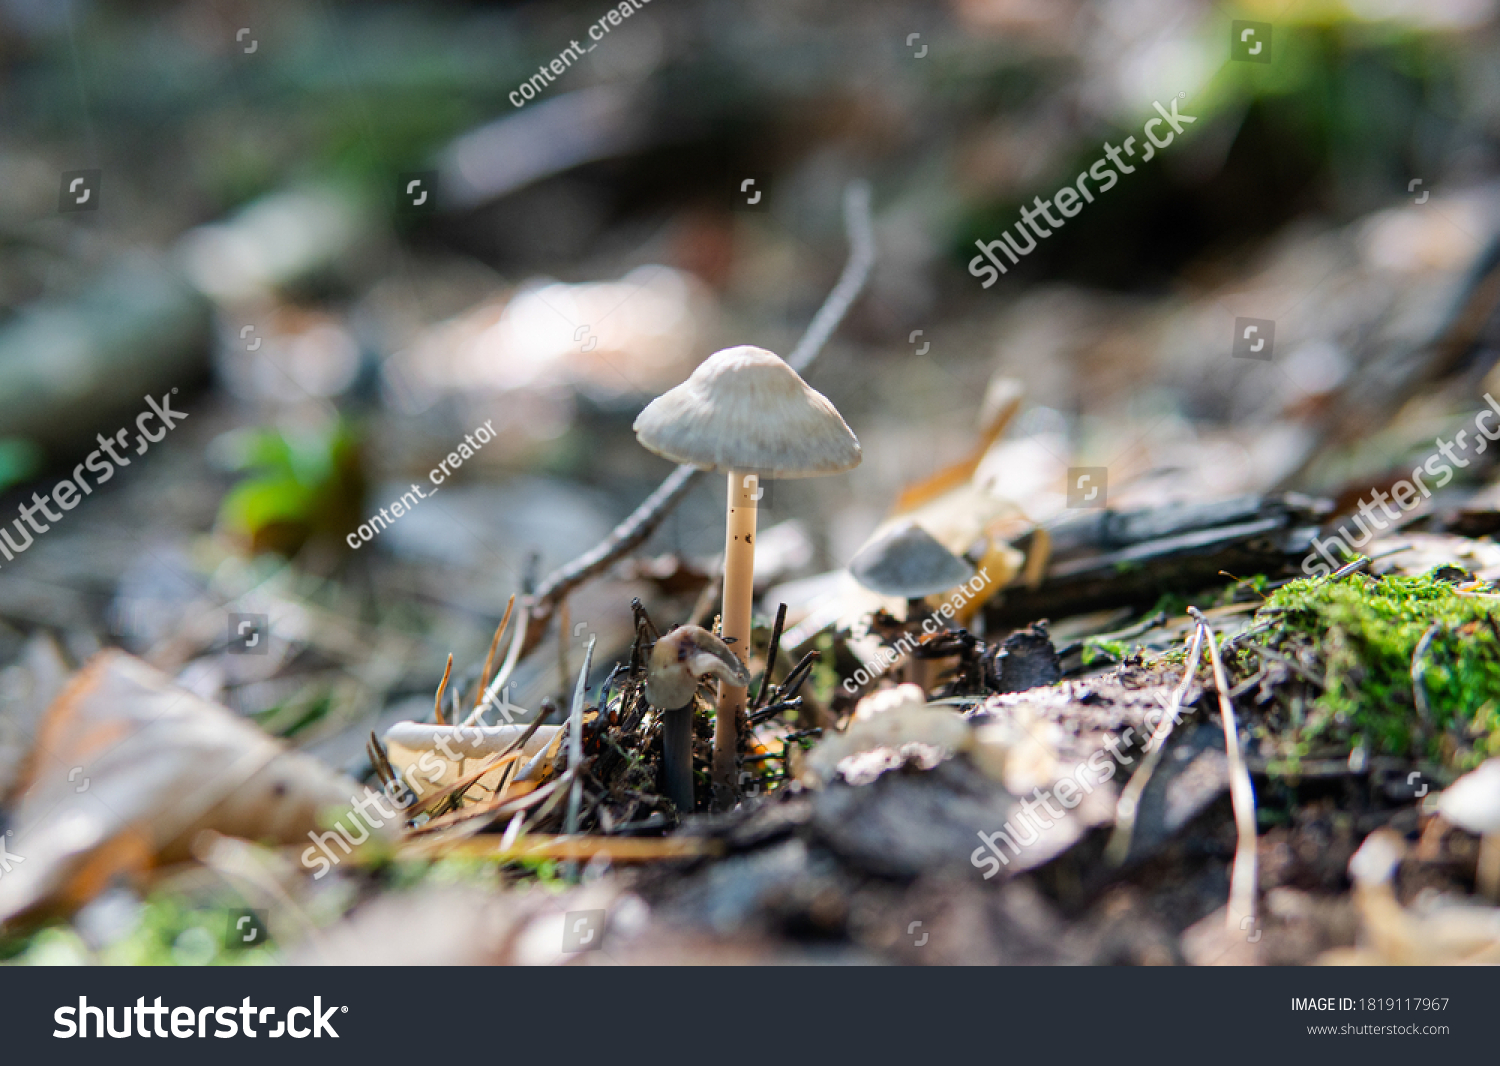 Identification Medicinal Mushrooms Fungotherapy Our Days Stock Photo Edit Now 1819117967